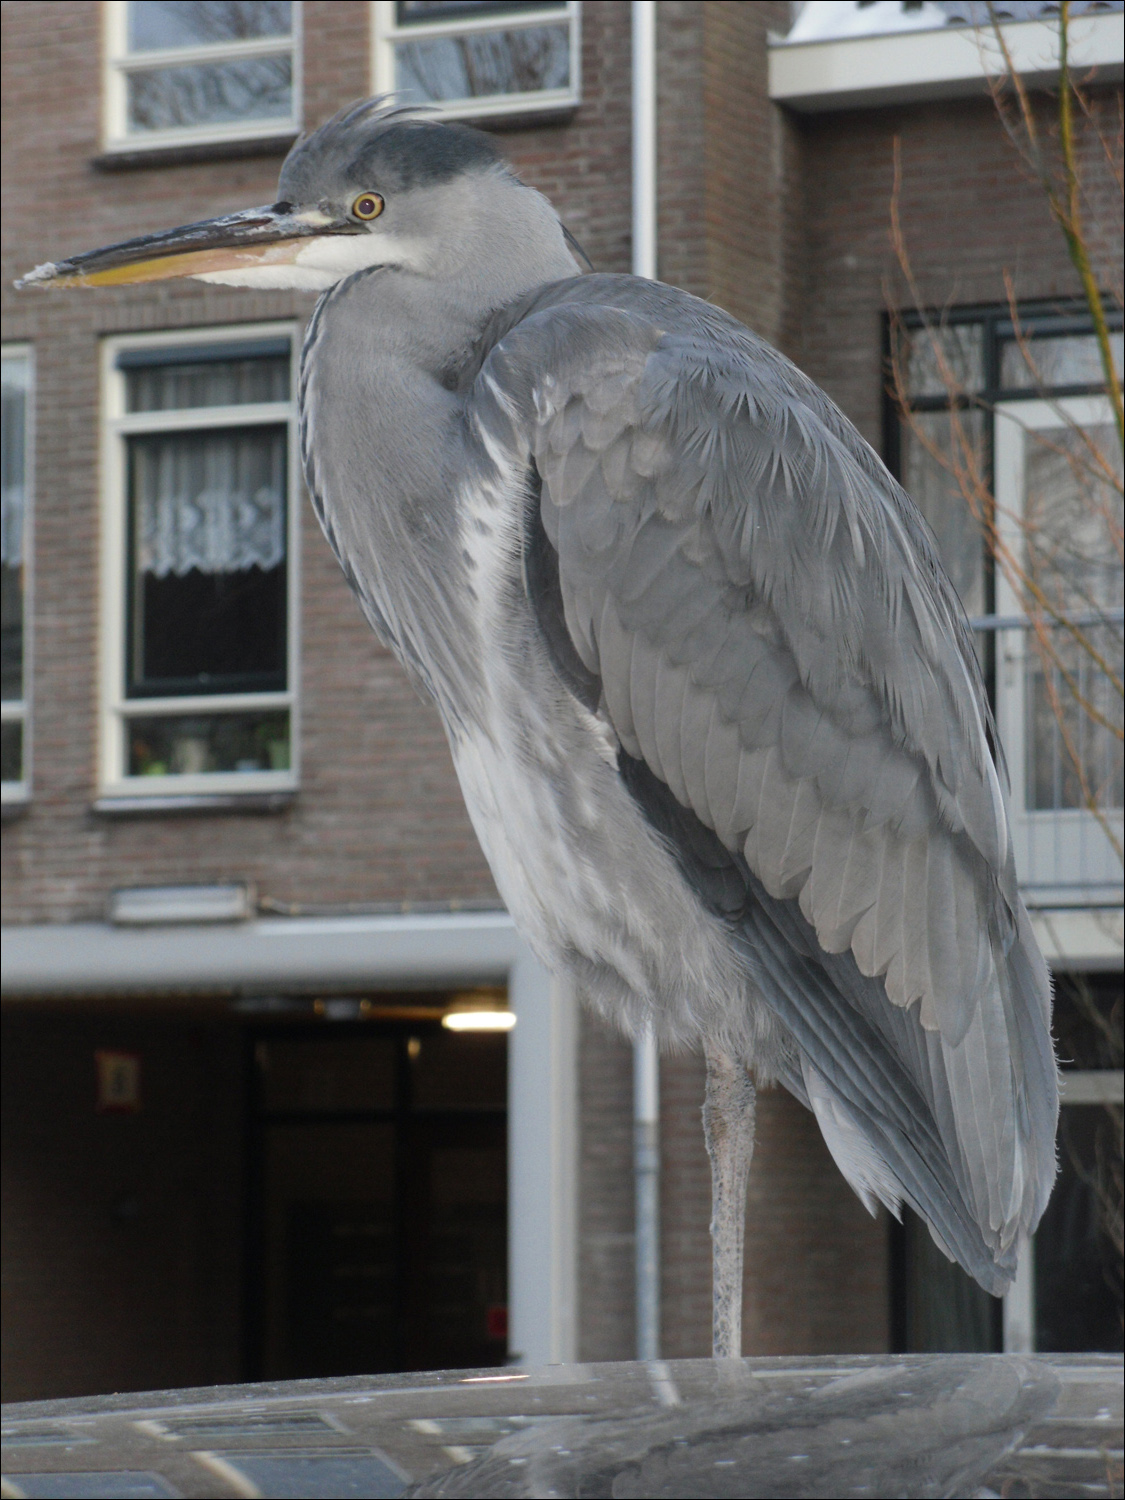 Delft-this guy was about 2 ft tall, standing on top of a car